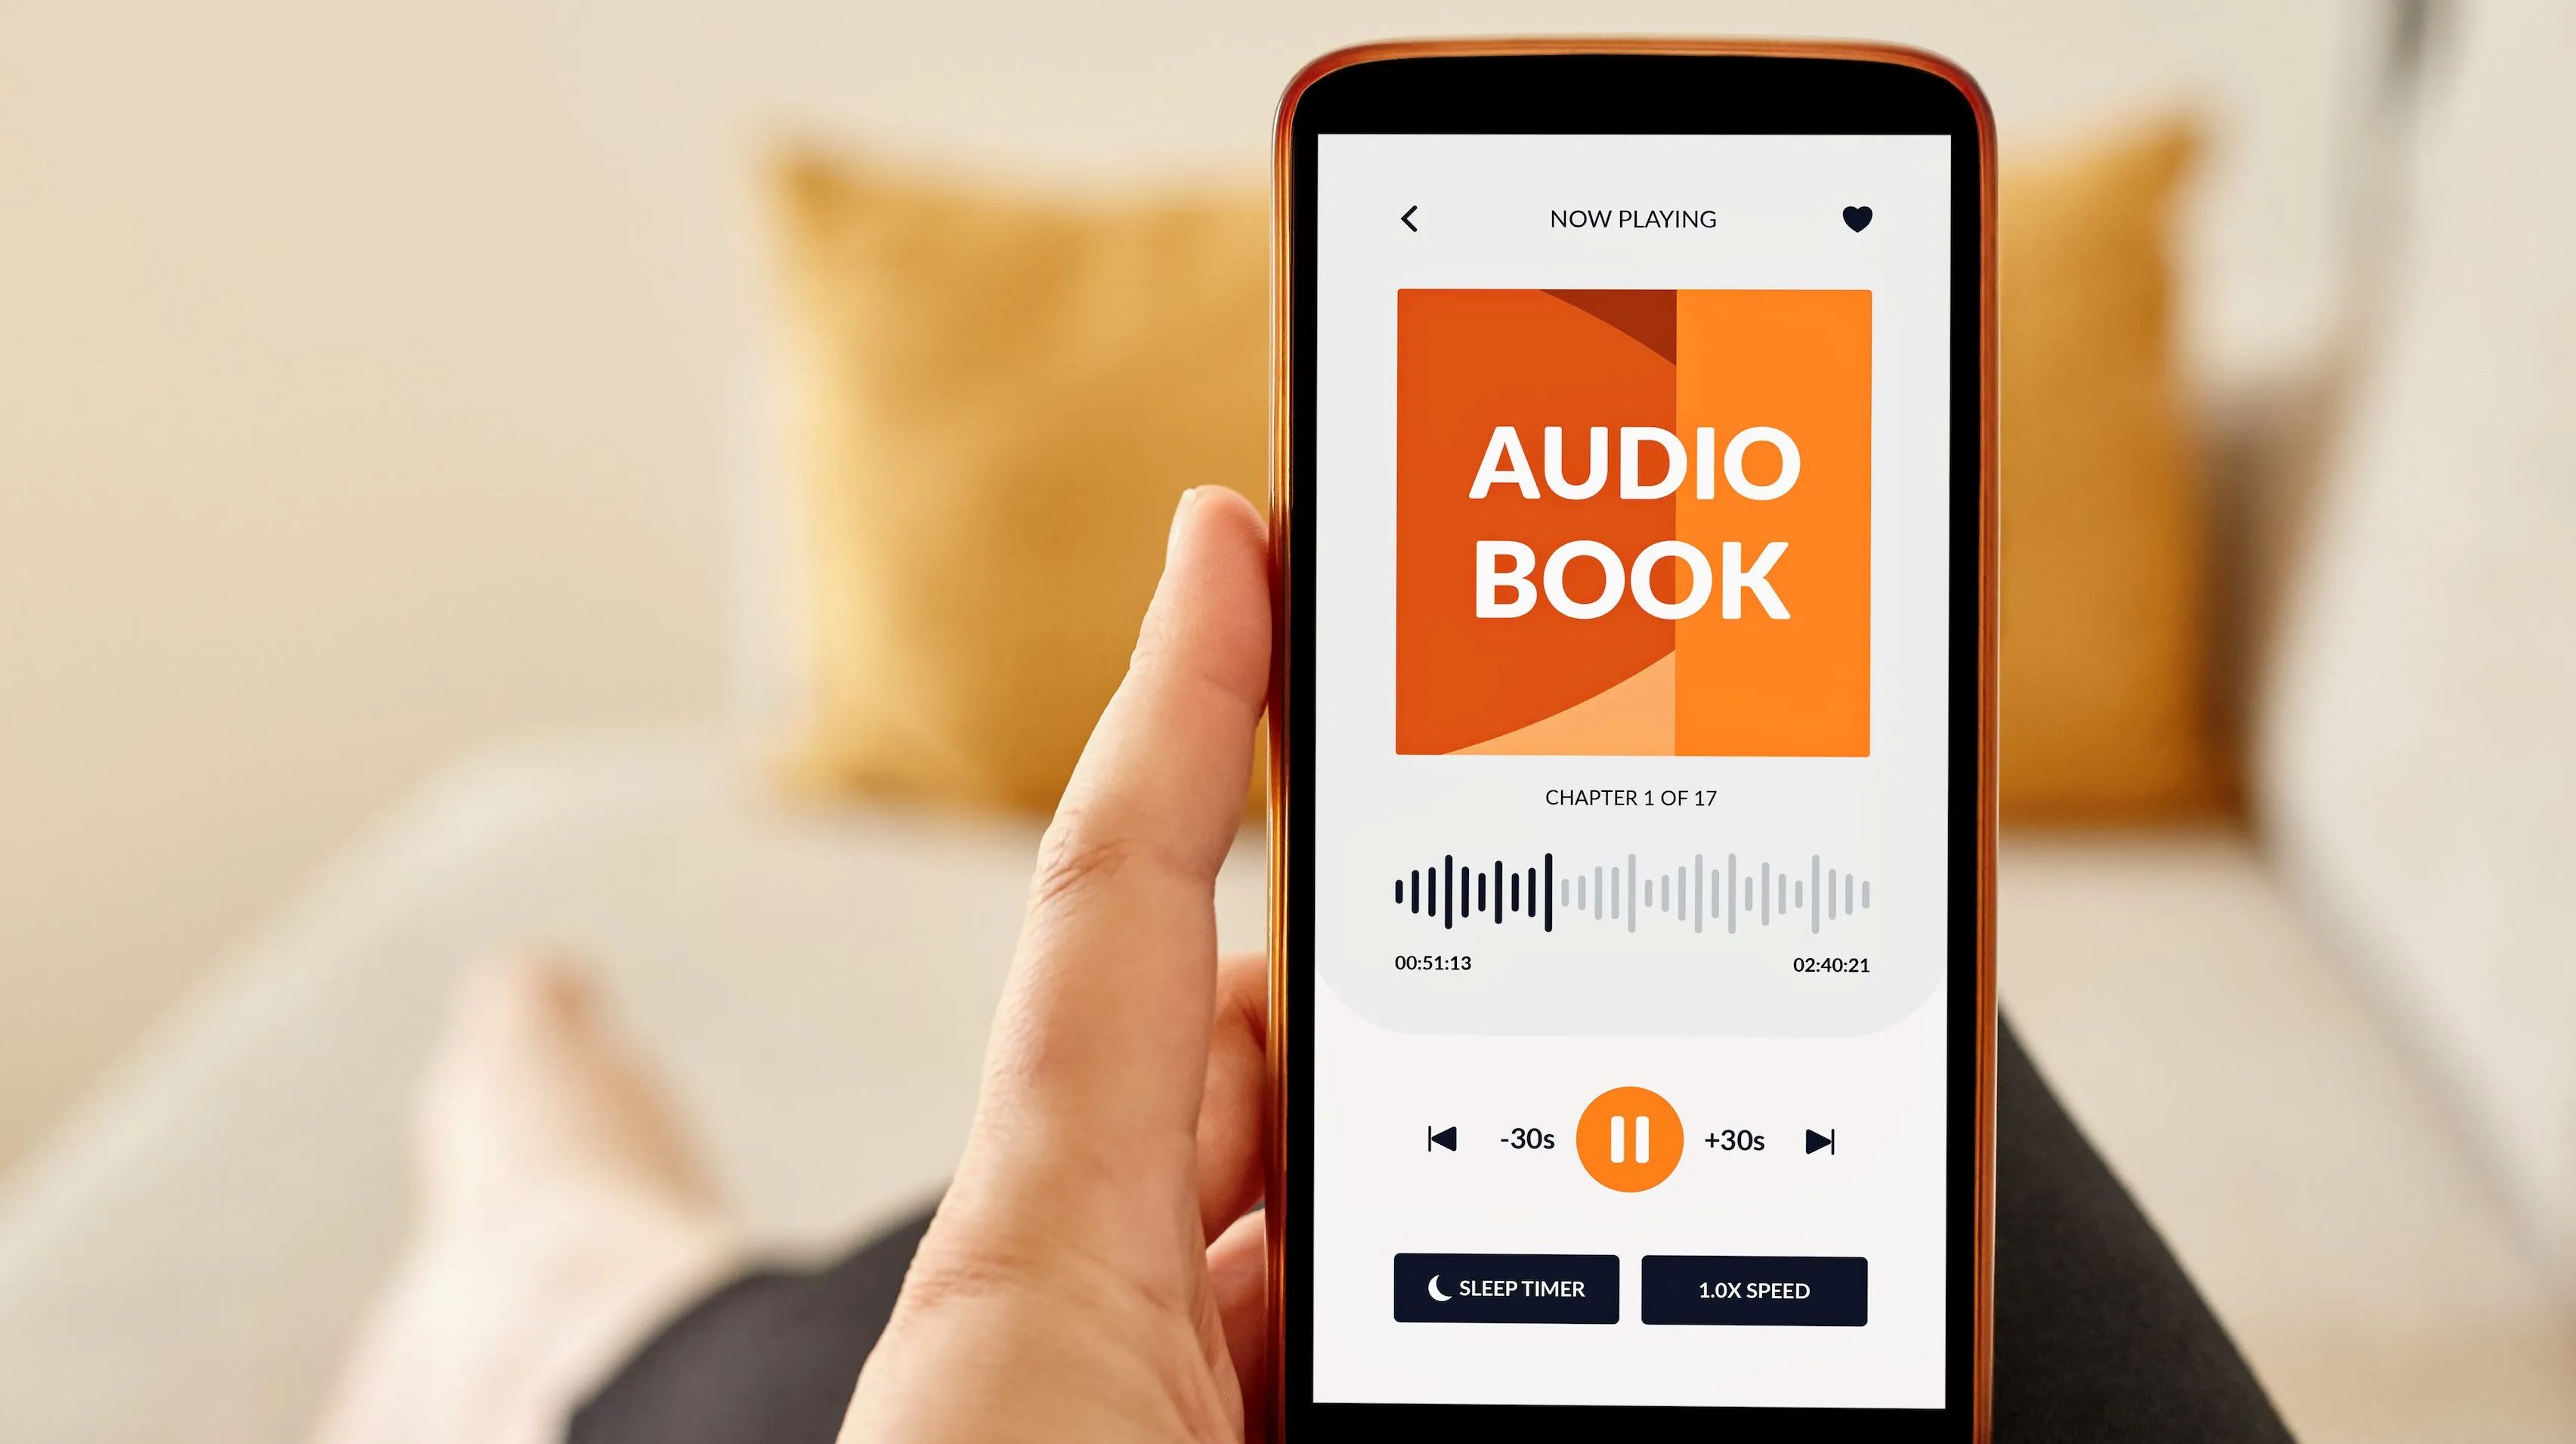 How To Share An Audiobook